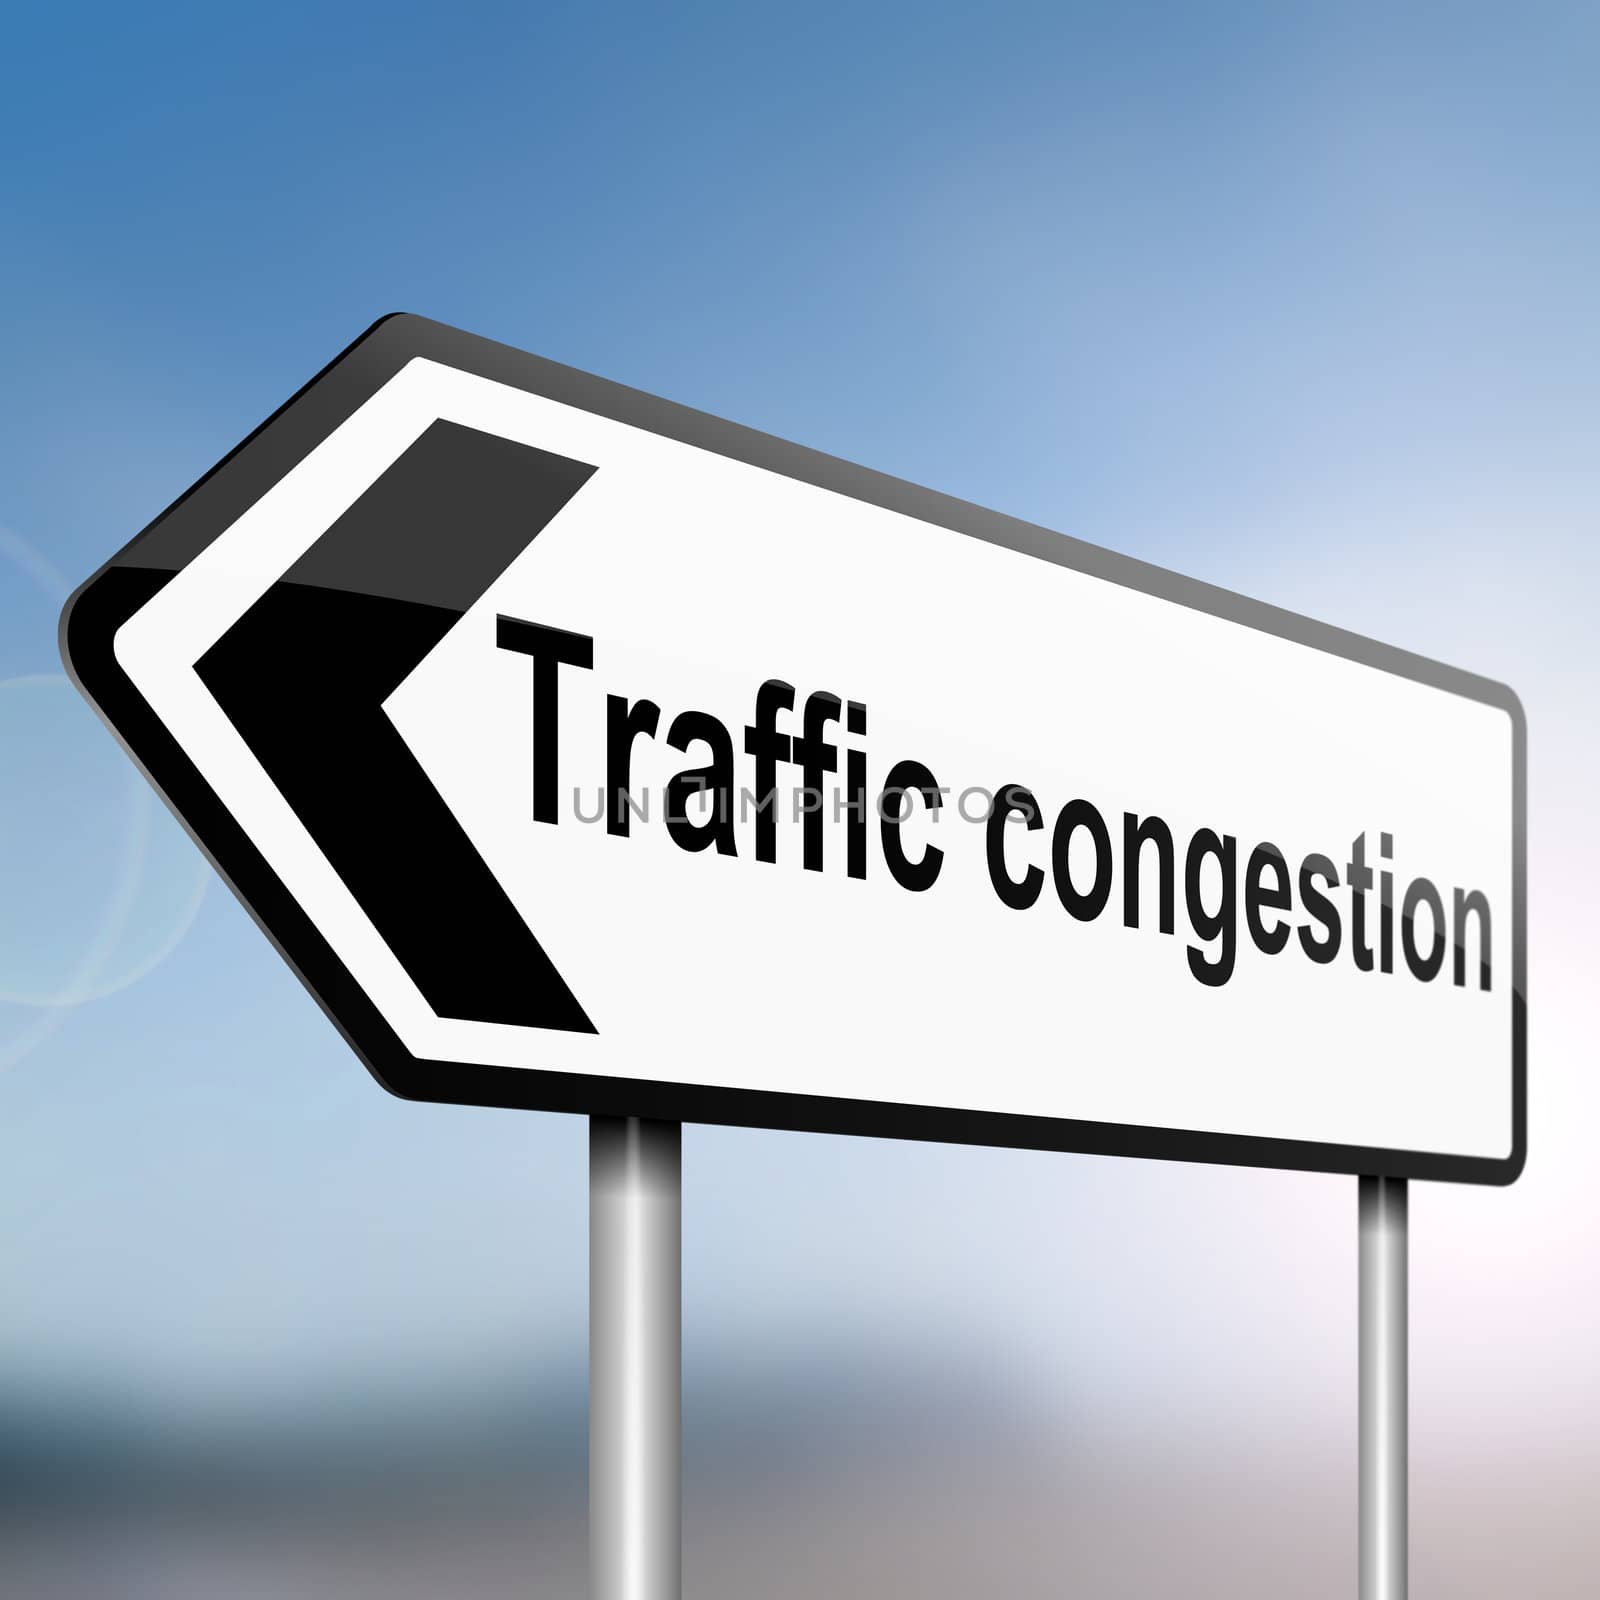 illustration depicting a sign post with directional arrow containing a traffic congestion concept. Blurred background.